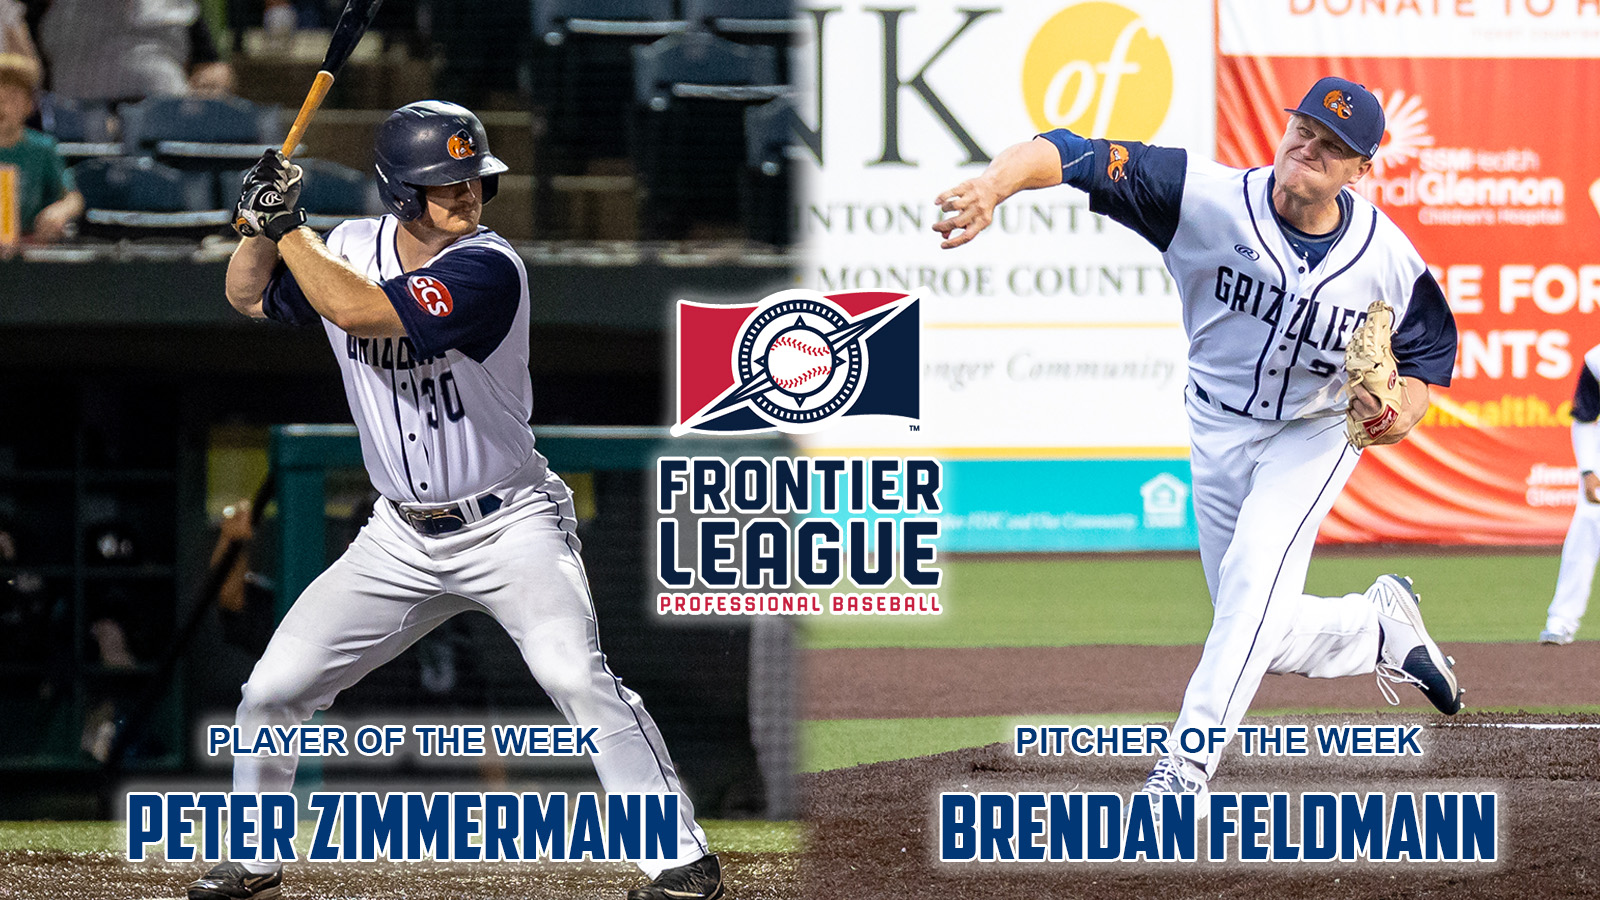 FIRST 2022 PLAYER AND PITCHER OF THE WEEK AWARDS GO TO PETER ZIMMERMAN AND BRENDAN FELDMANN